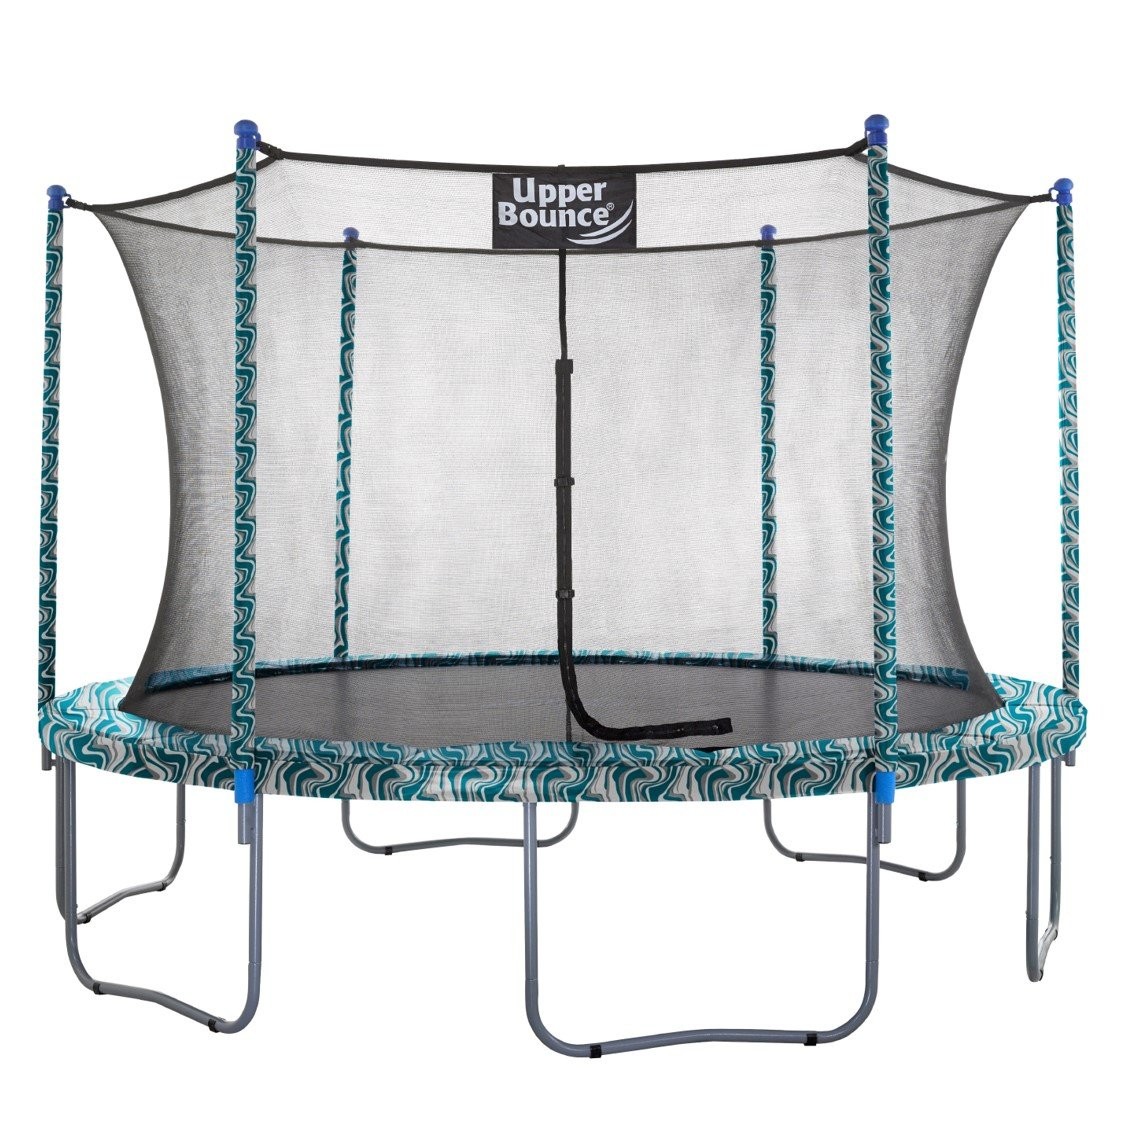 12Ft Large Trampoline and Enclosure Set | Garden & Outdoor Trampoline with Safety Net, Mat, Pad | Maui Marble